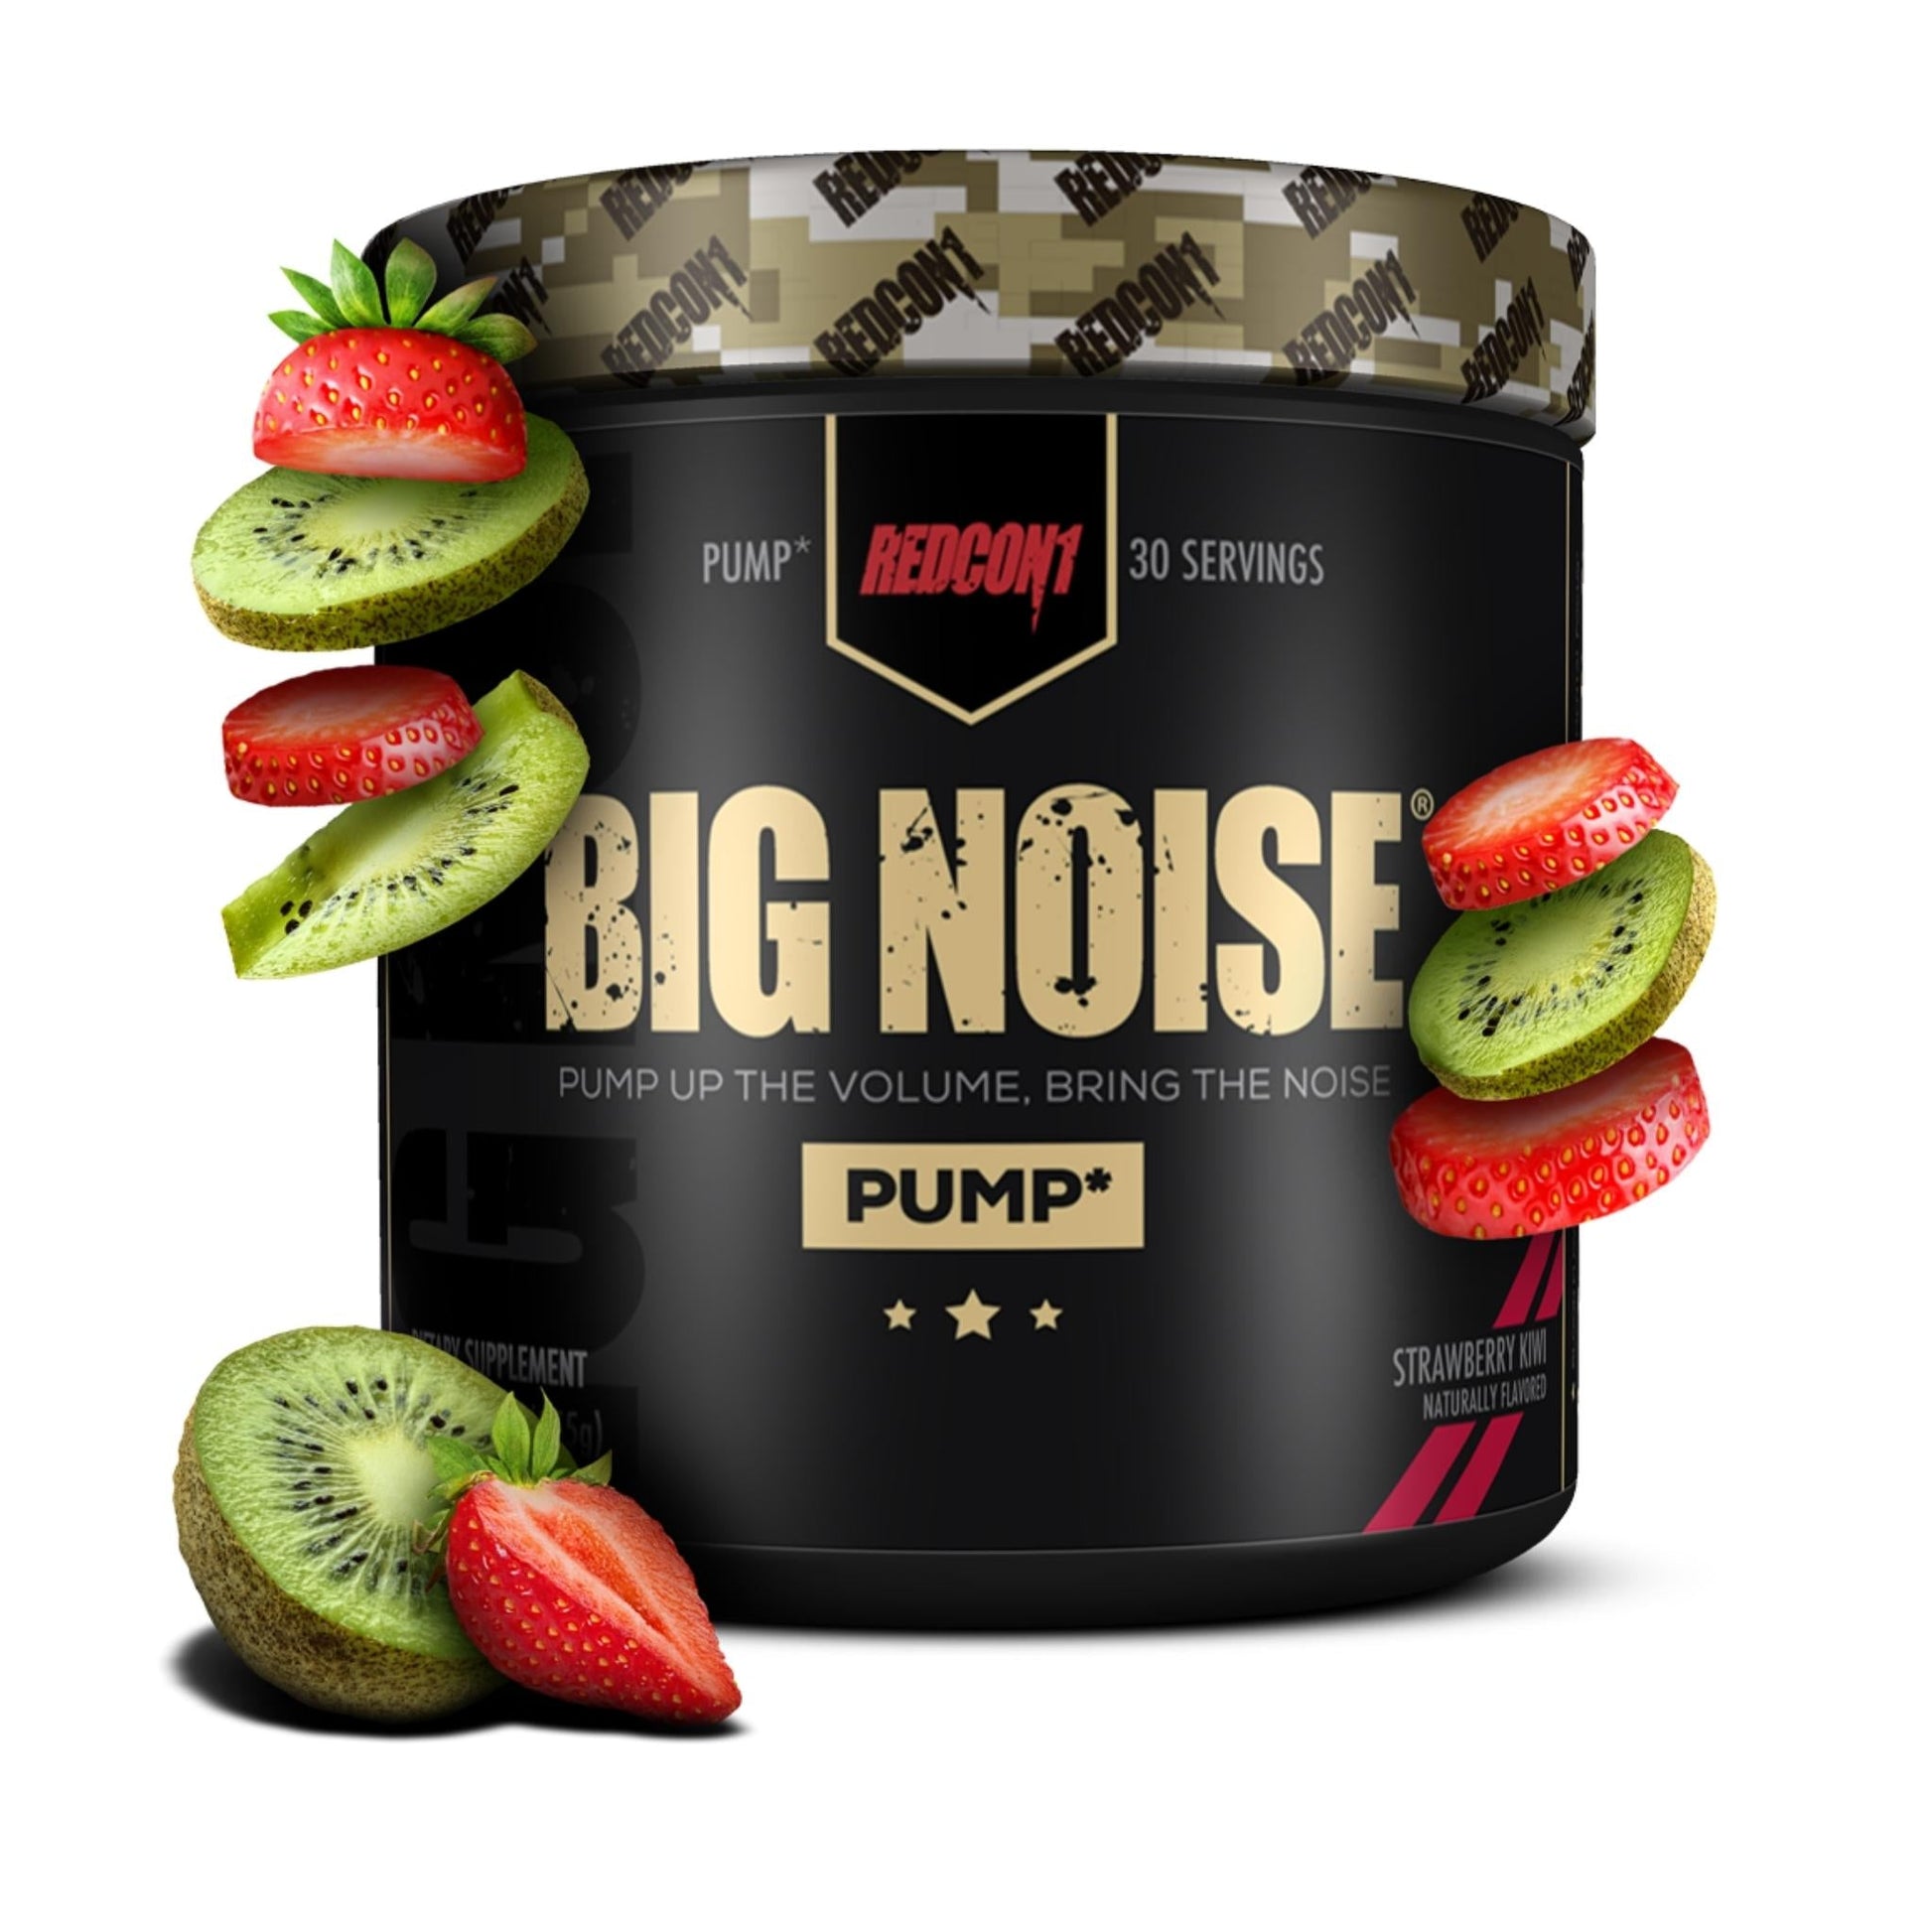 Redcon1 Big Noise Pump - 30 Serves - Supplements - Strawberry Kiwi - The Cave Gym